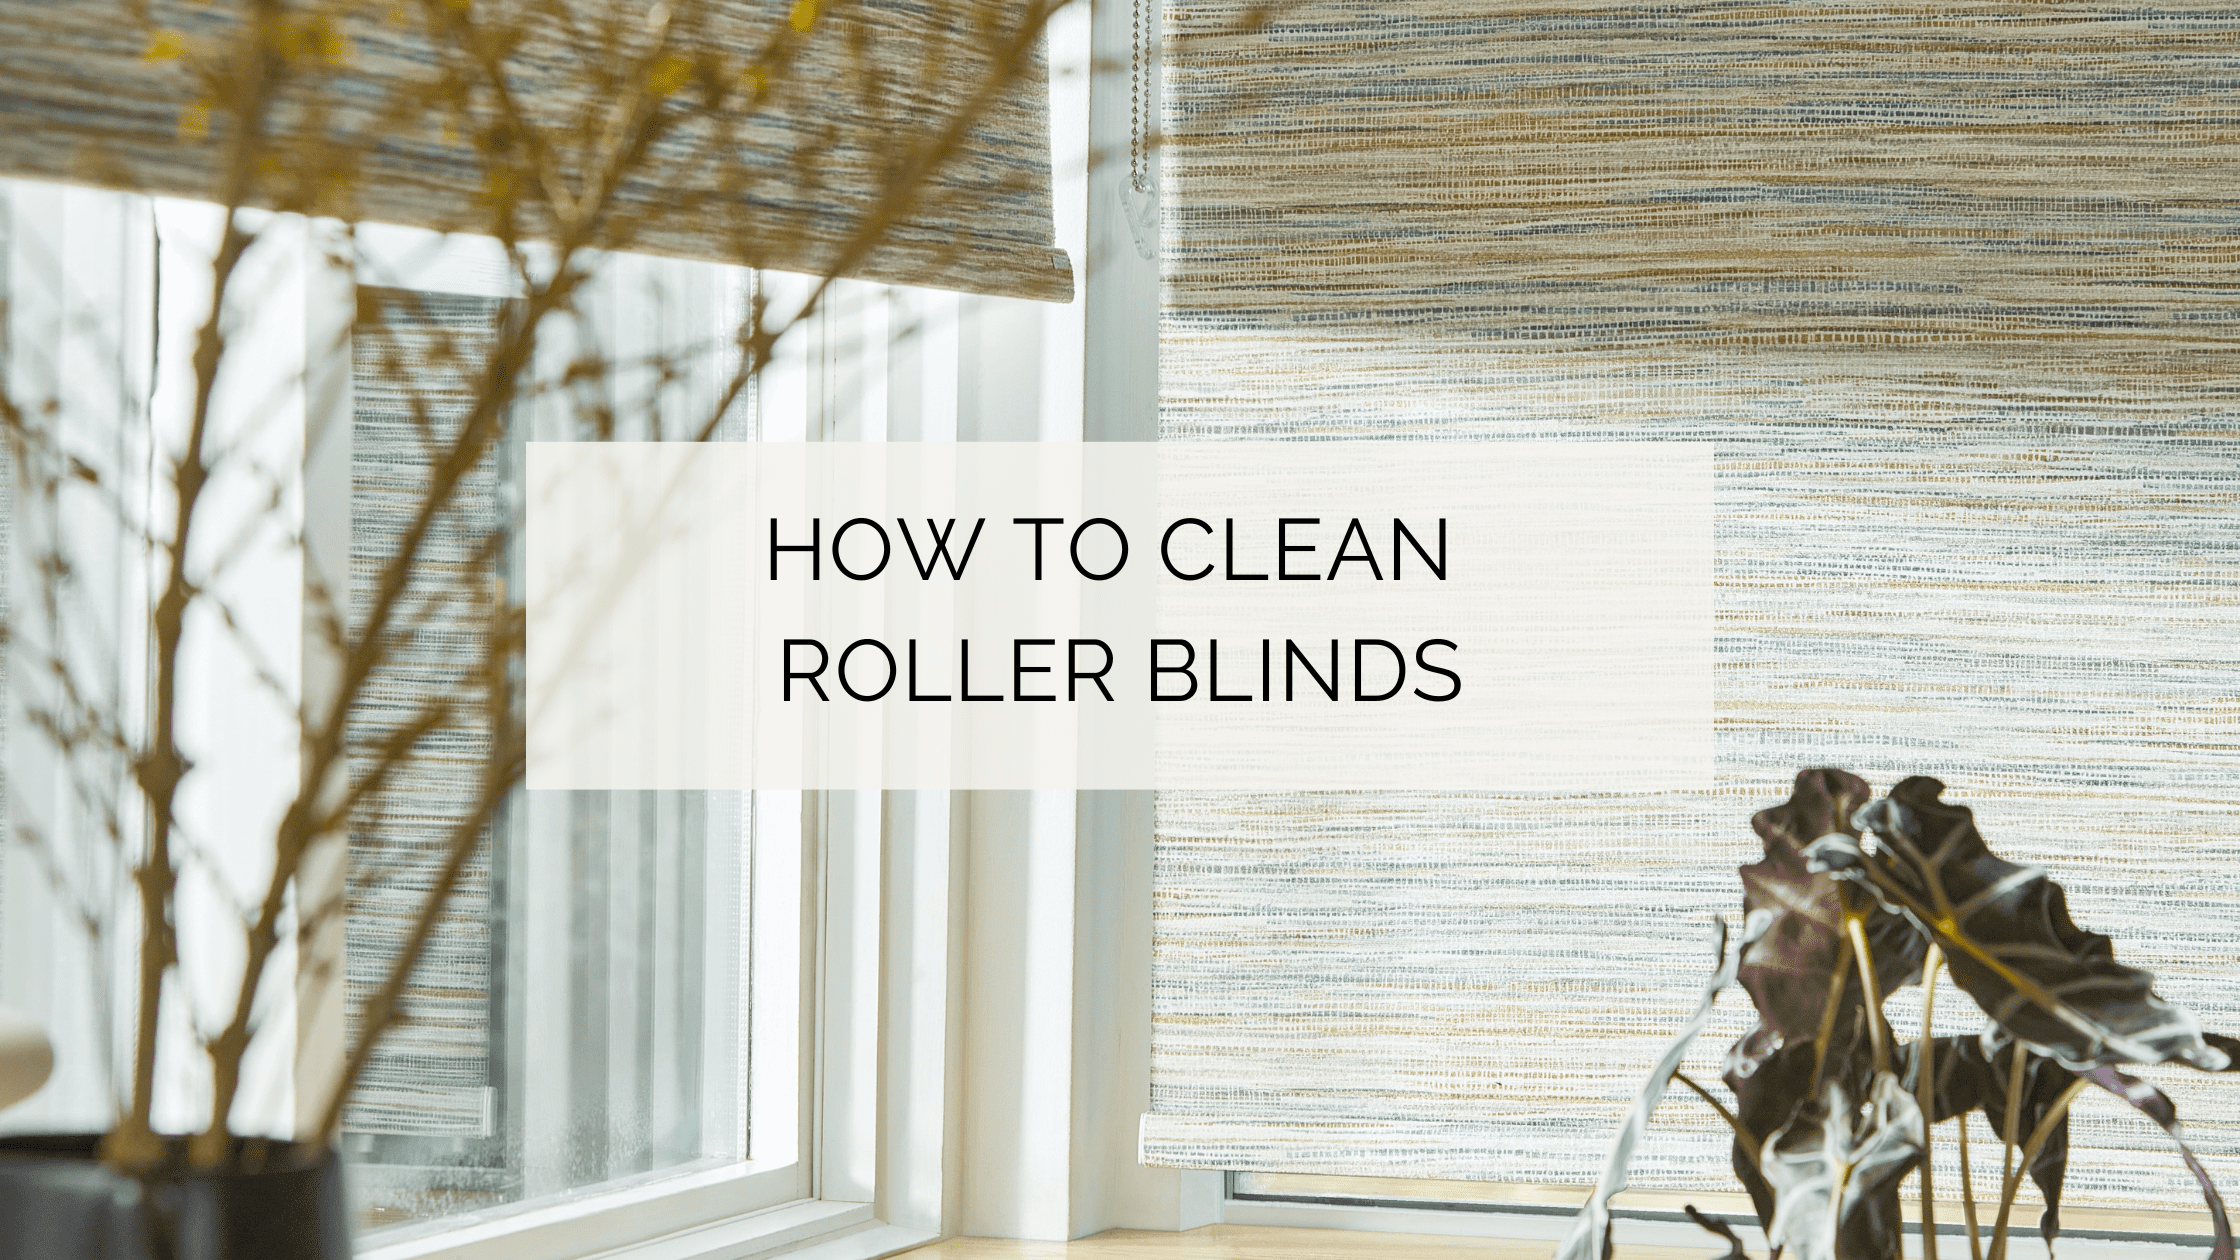 How to Clean Blinds - Clean Blinds Without Taking Them Down